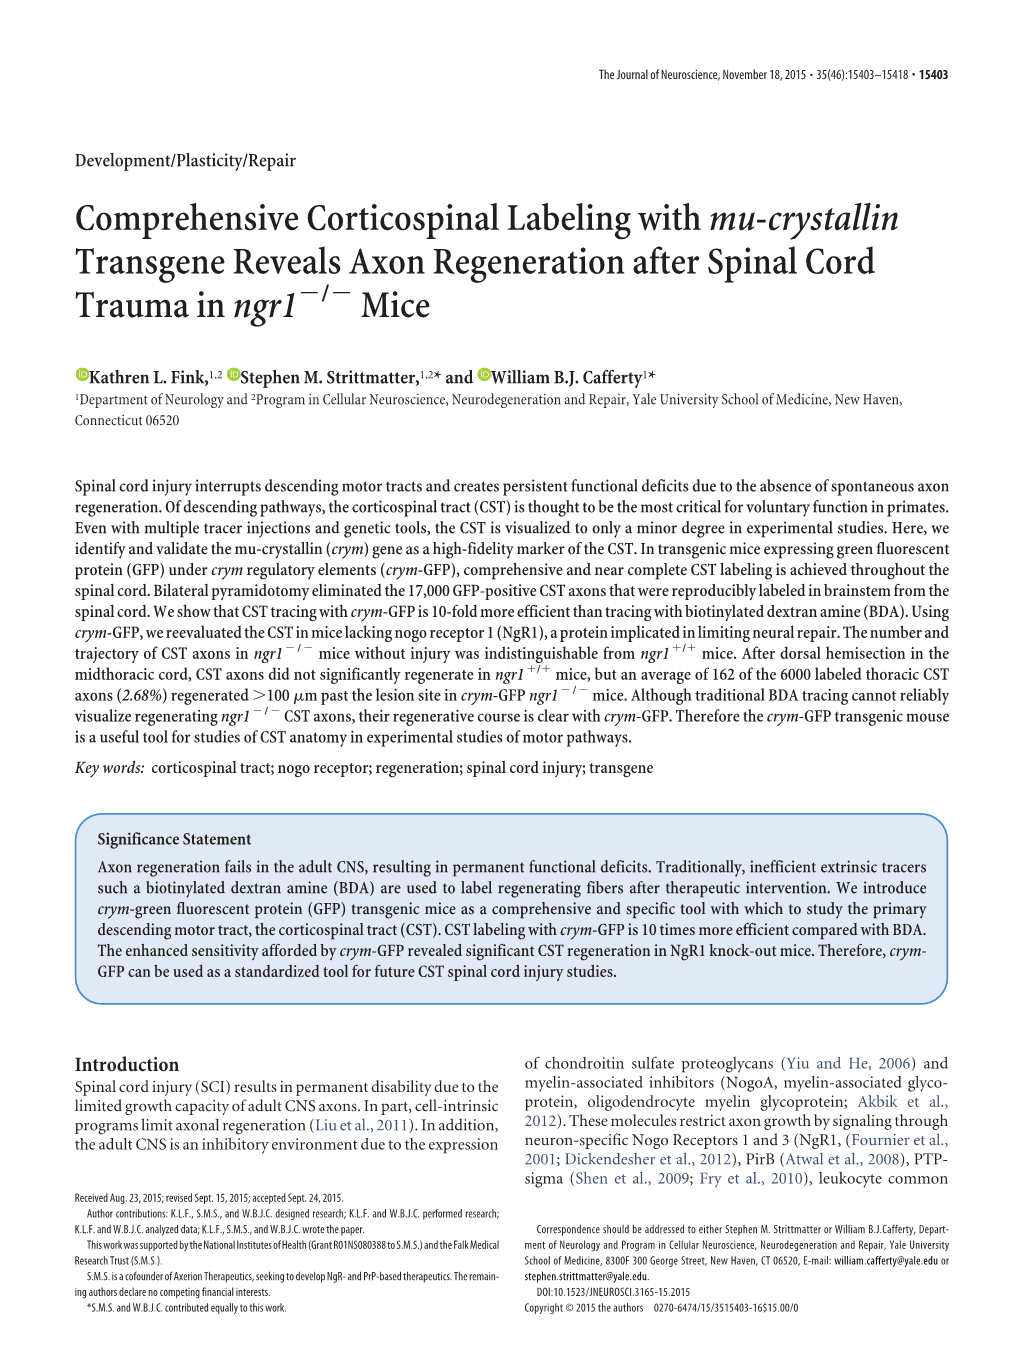 Comprehensive Corticospinal Labeling Withmu-Crystallin Transgene Reveals Axon Regeneration After Spinal Cord Trauma Inngr1 Mice